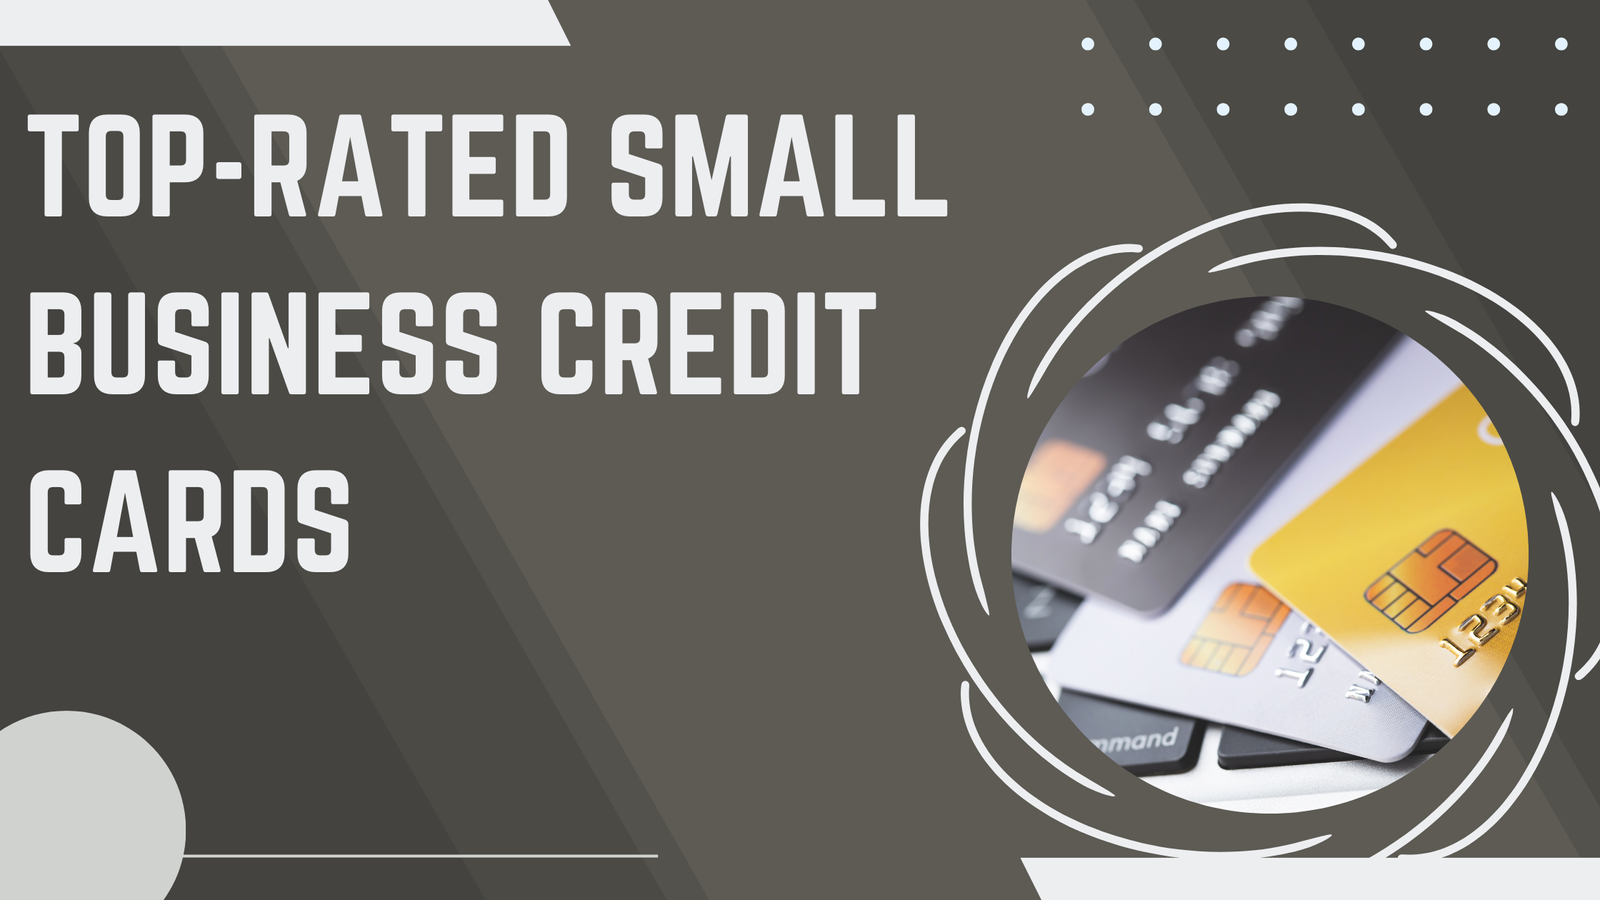 Top-rated small business credit cards